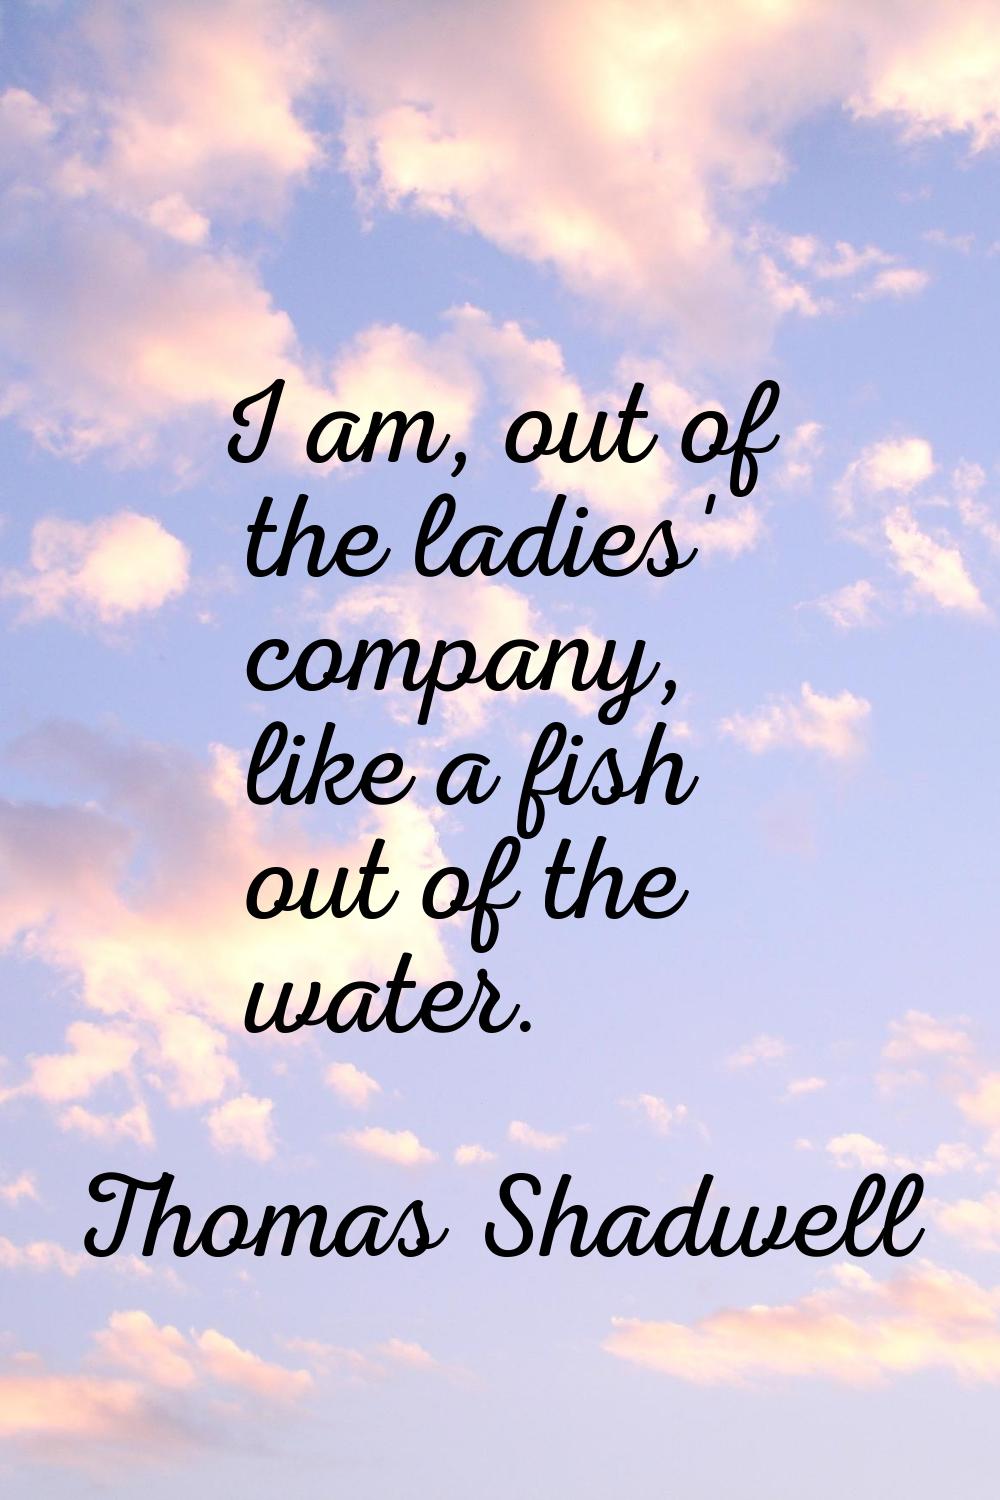 I am, out of the ladies' company, like a fish out of the water.